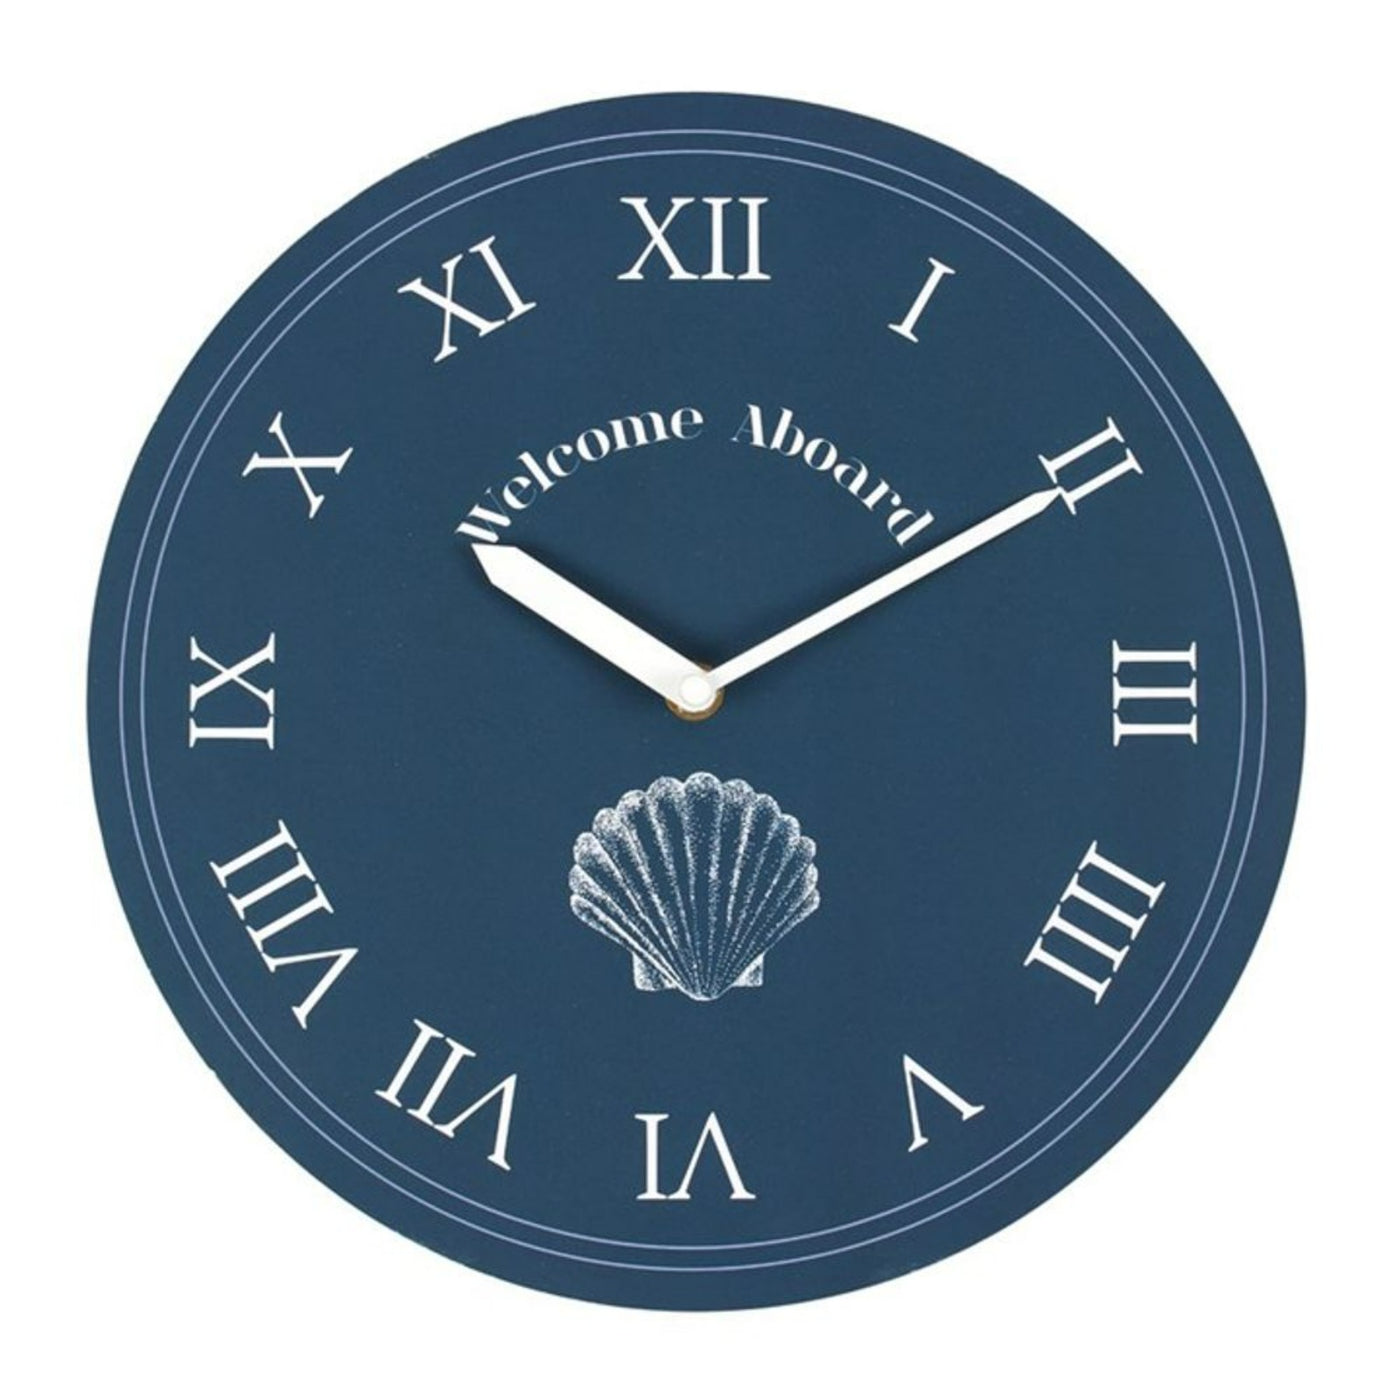 Welcome Aboard Round Navy Nautical Shell Wall Clock.